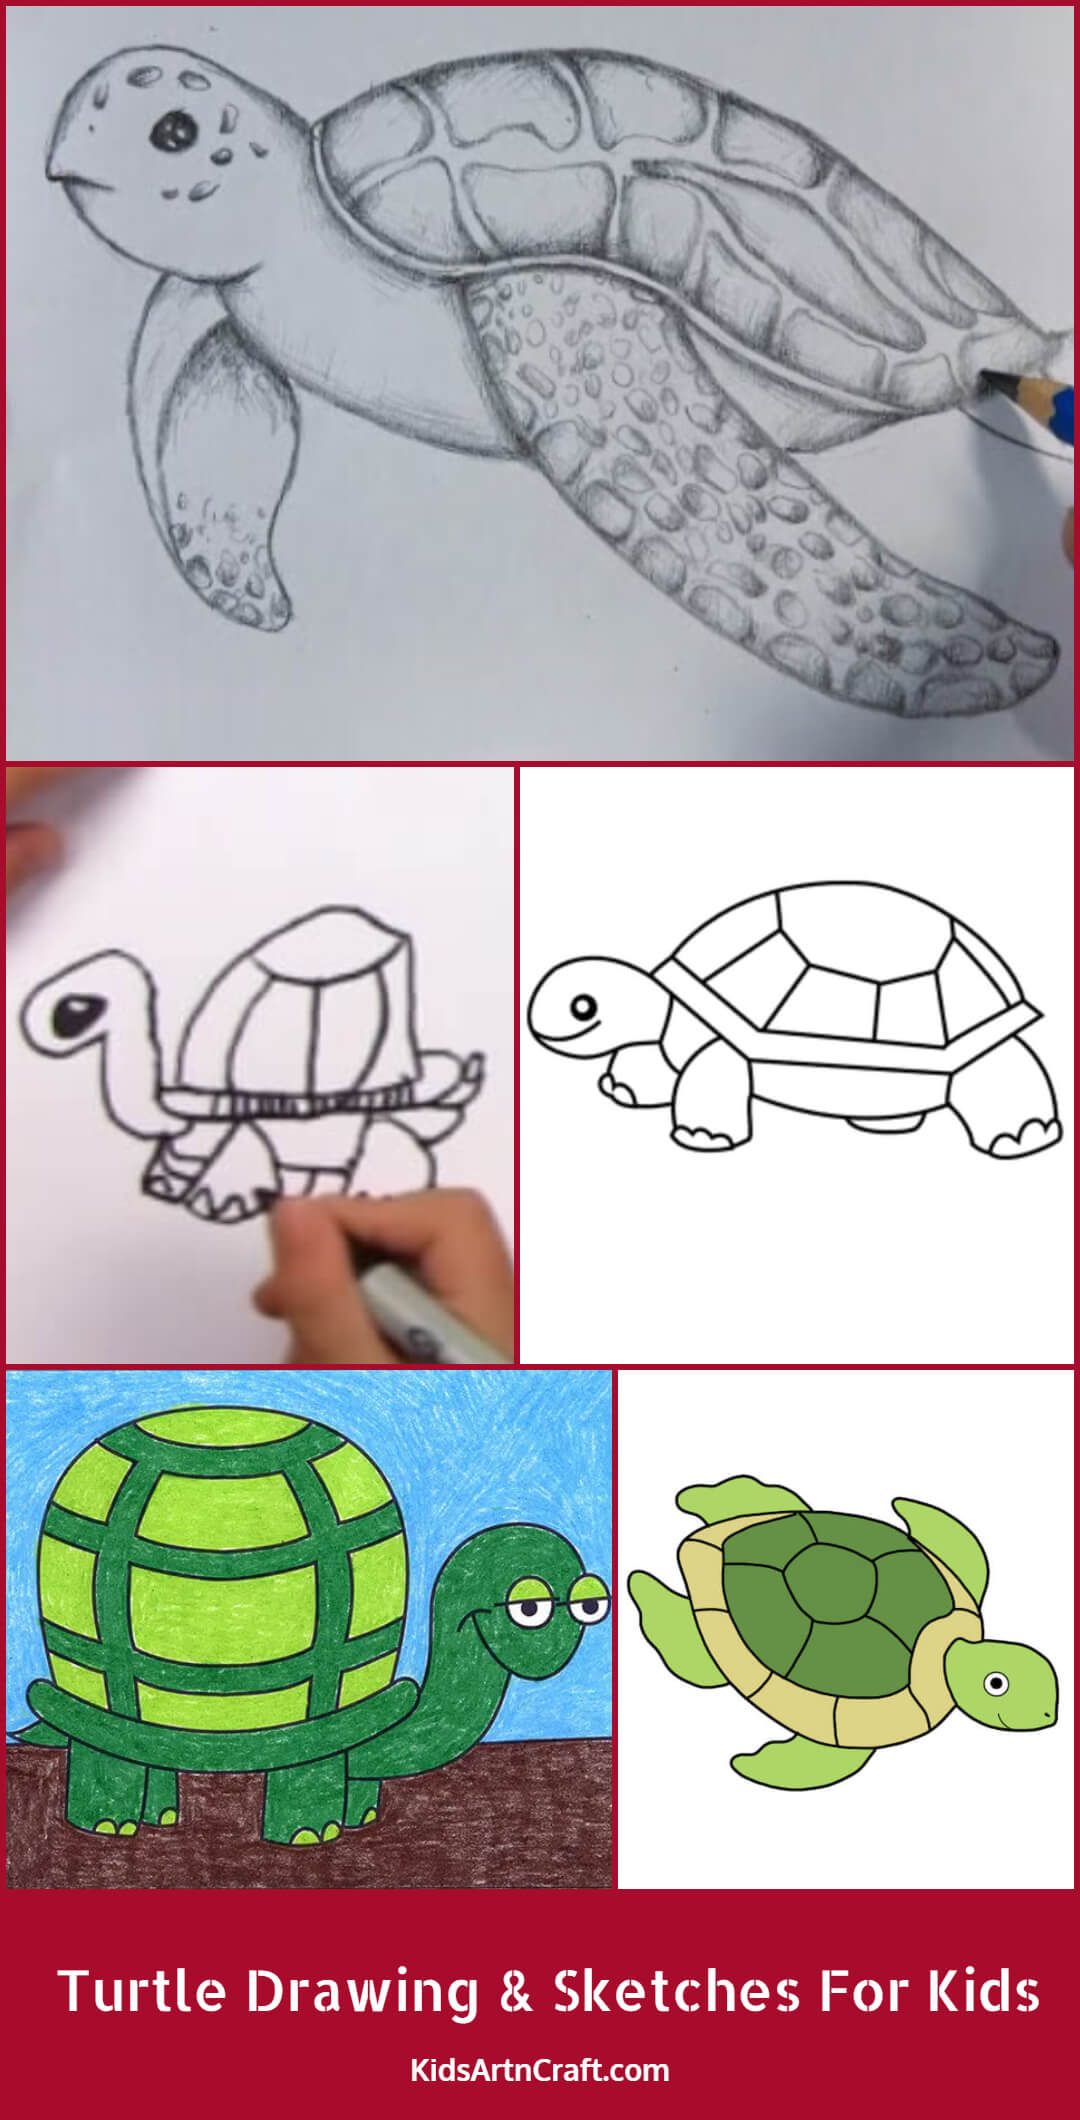 Turtle Drawing & Sketches For Kids